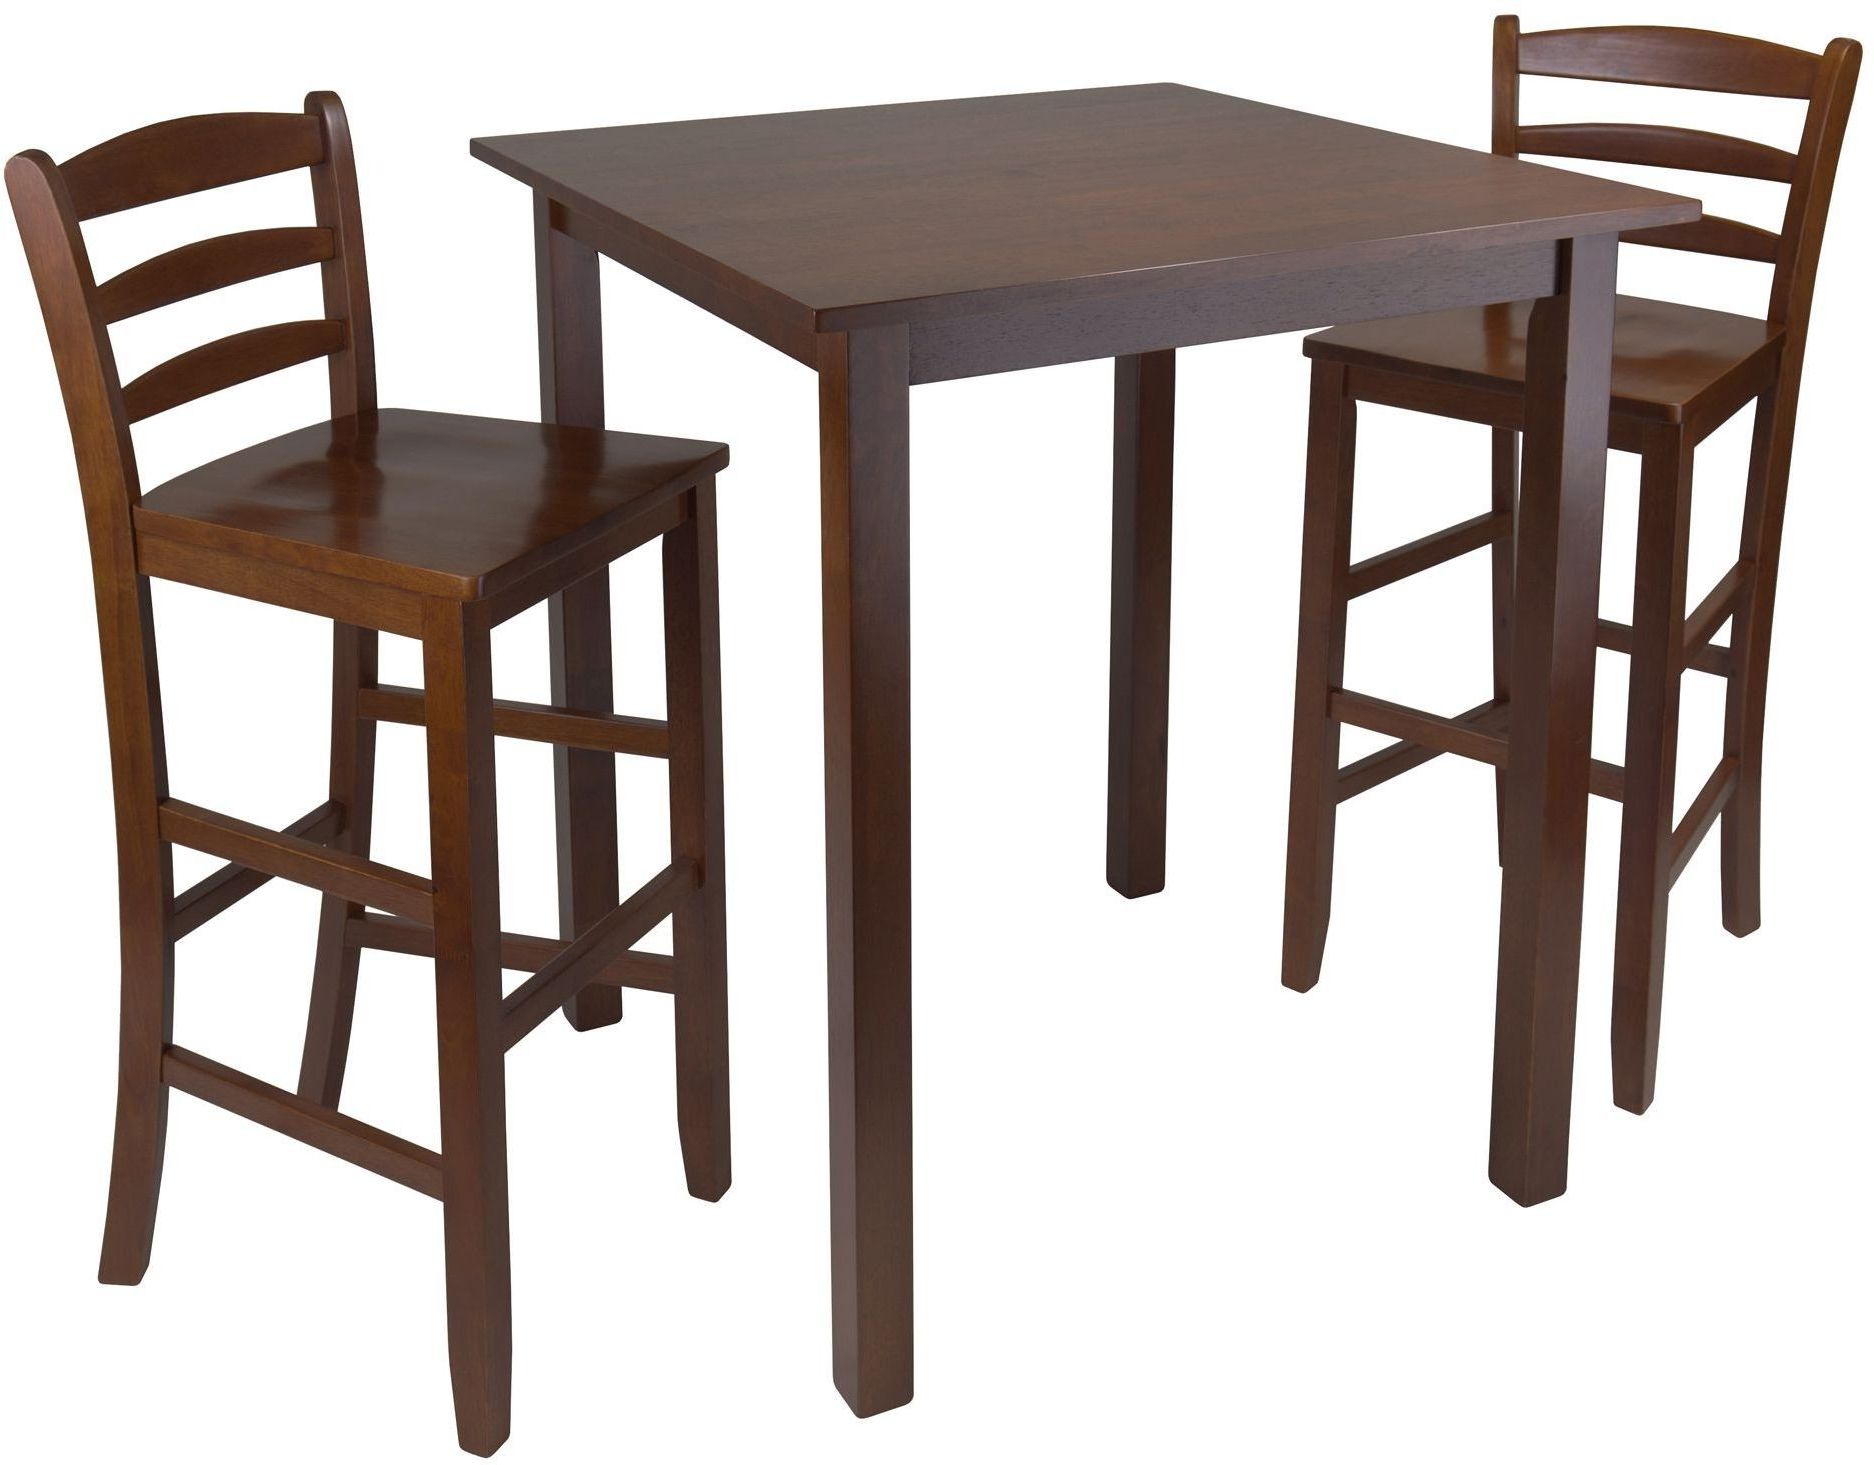 3 Piece Bistro Dining Sets In Recent Parkland Walnut 3 Piece Counter Height Dining Set With Ladder Back Bar (View 10 of 15)